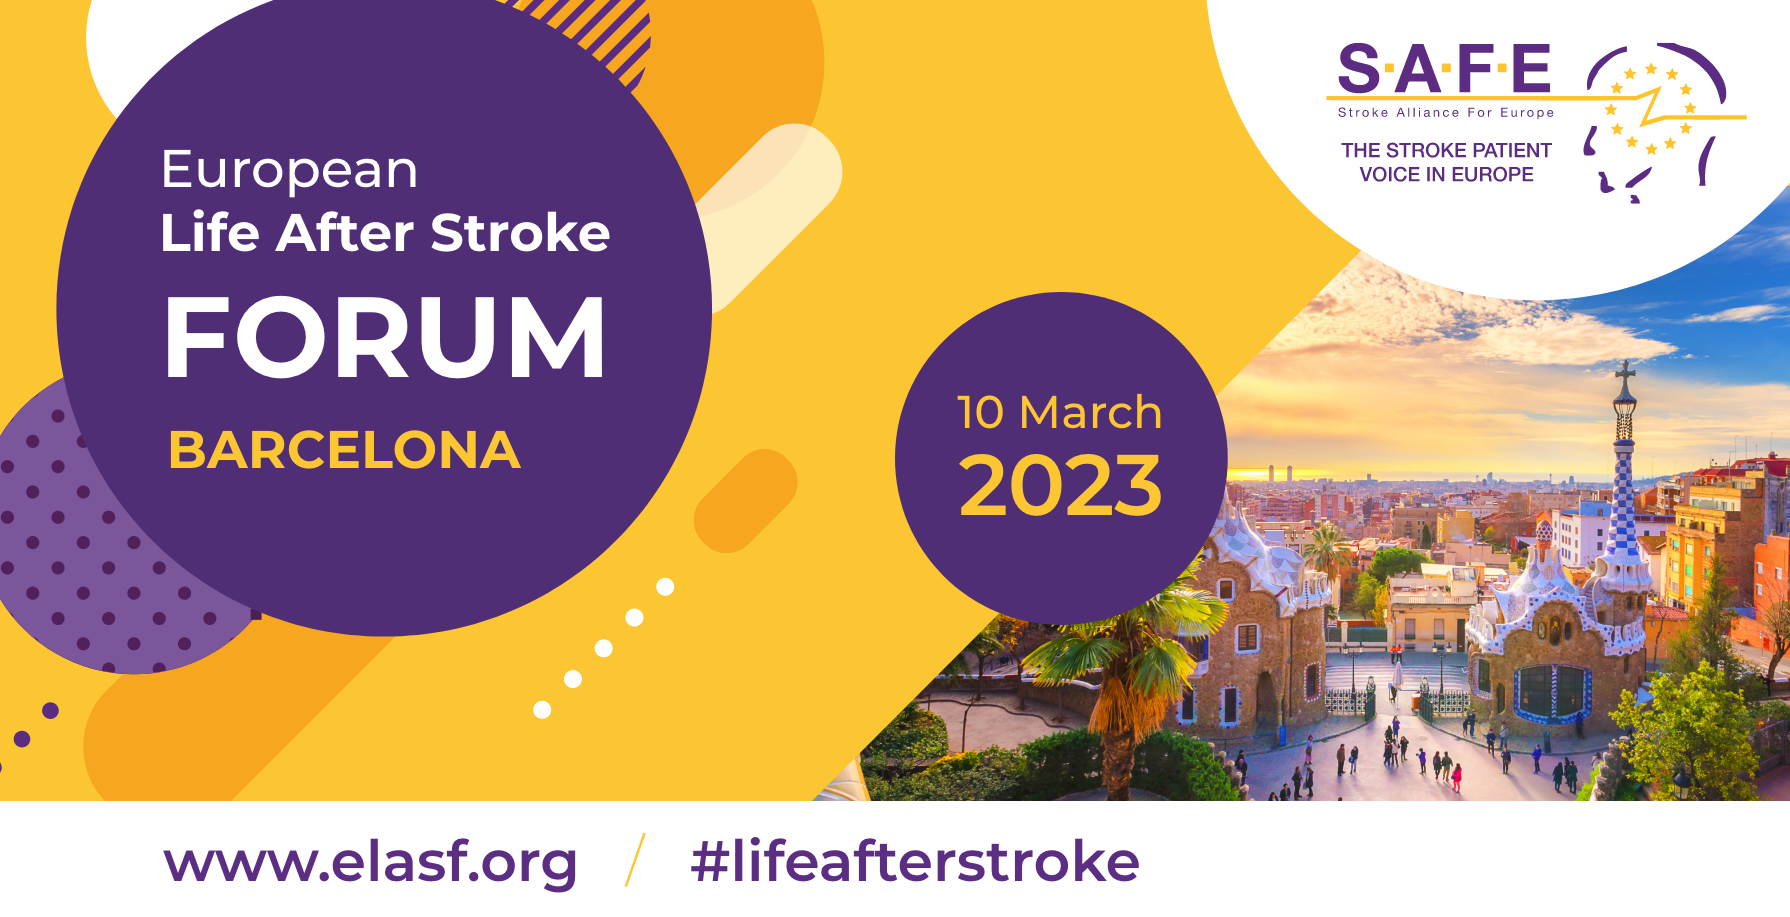 Early bird rate for the European Life After Stroke Forum extended to 31 January